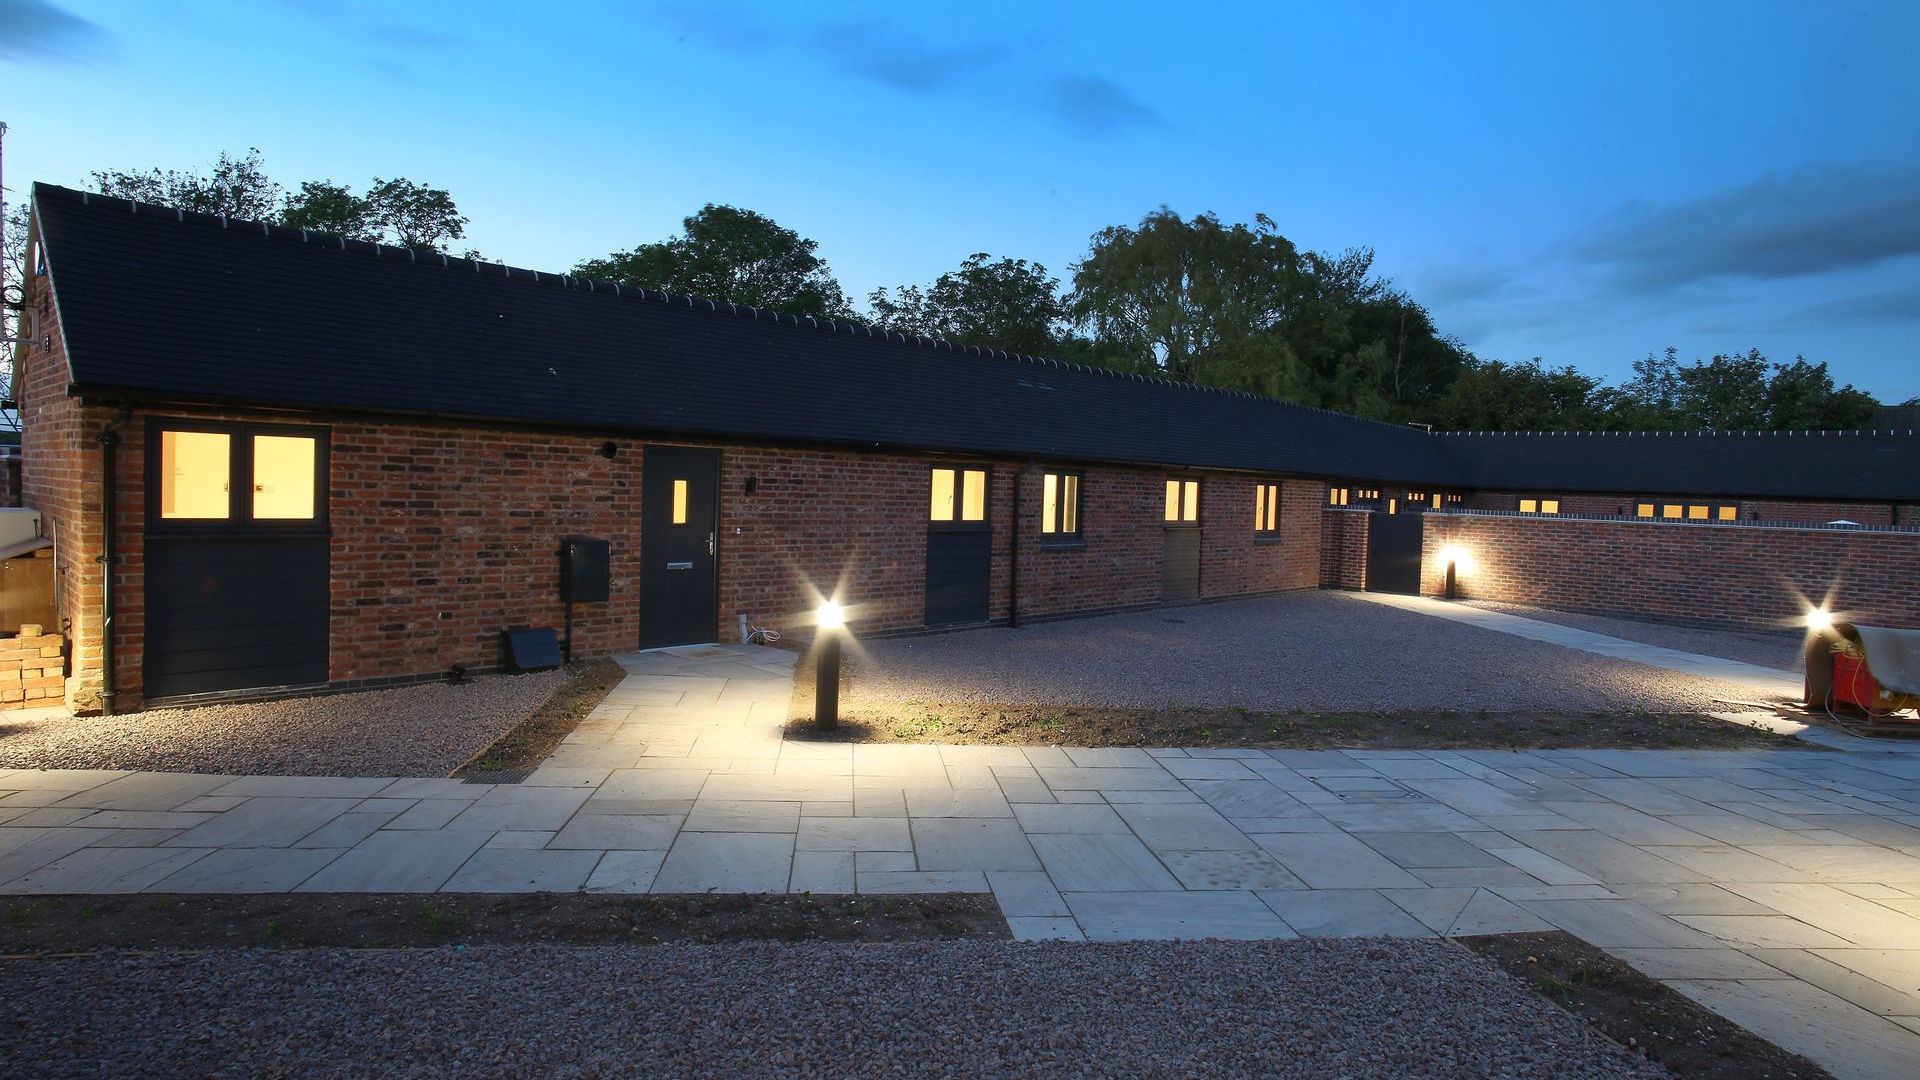 Newbold Farm, A row of brick buildings are lit up at night